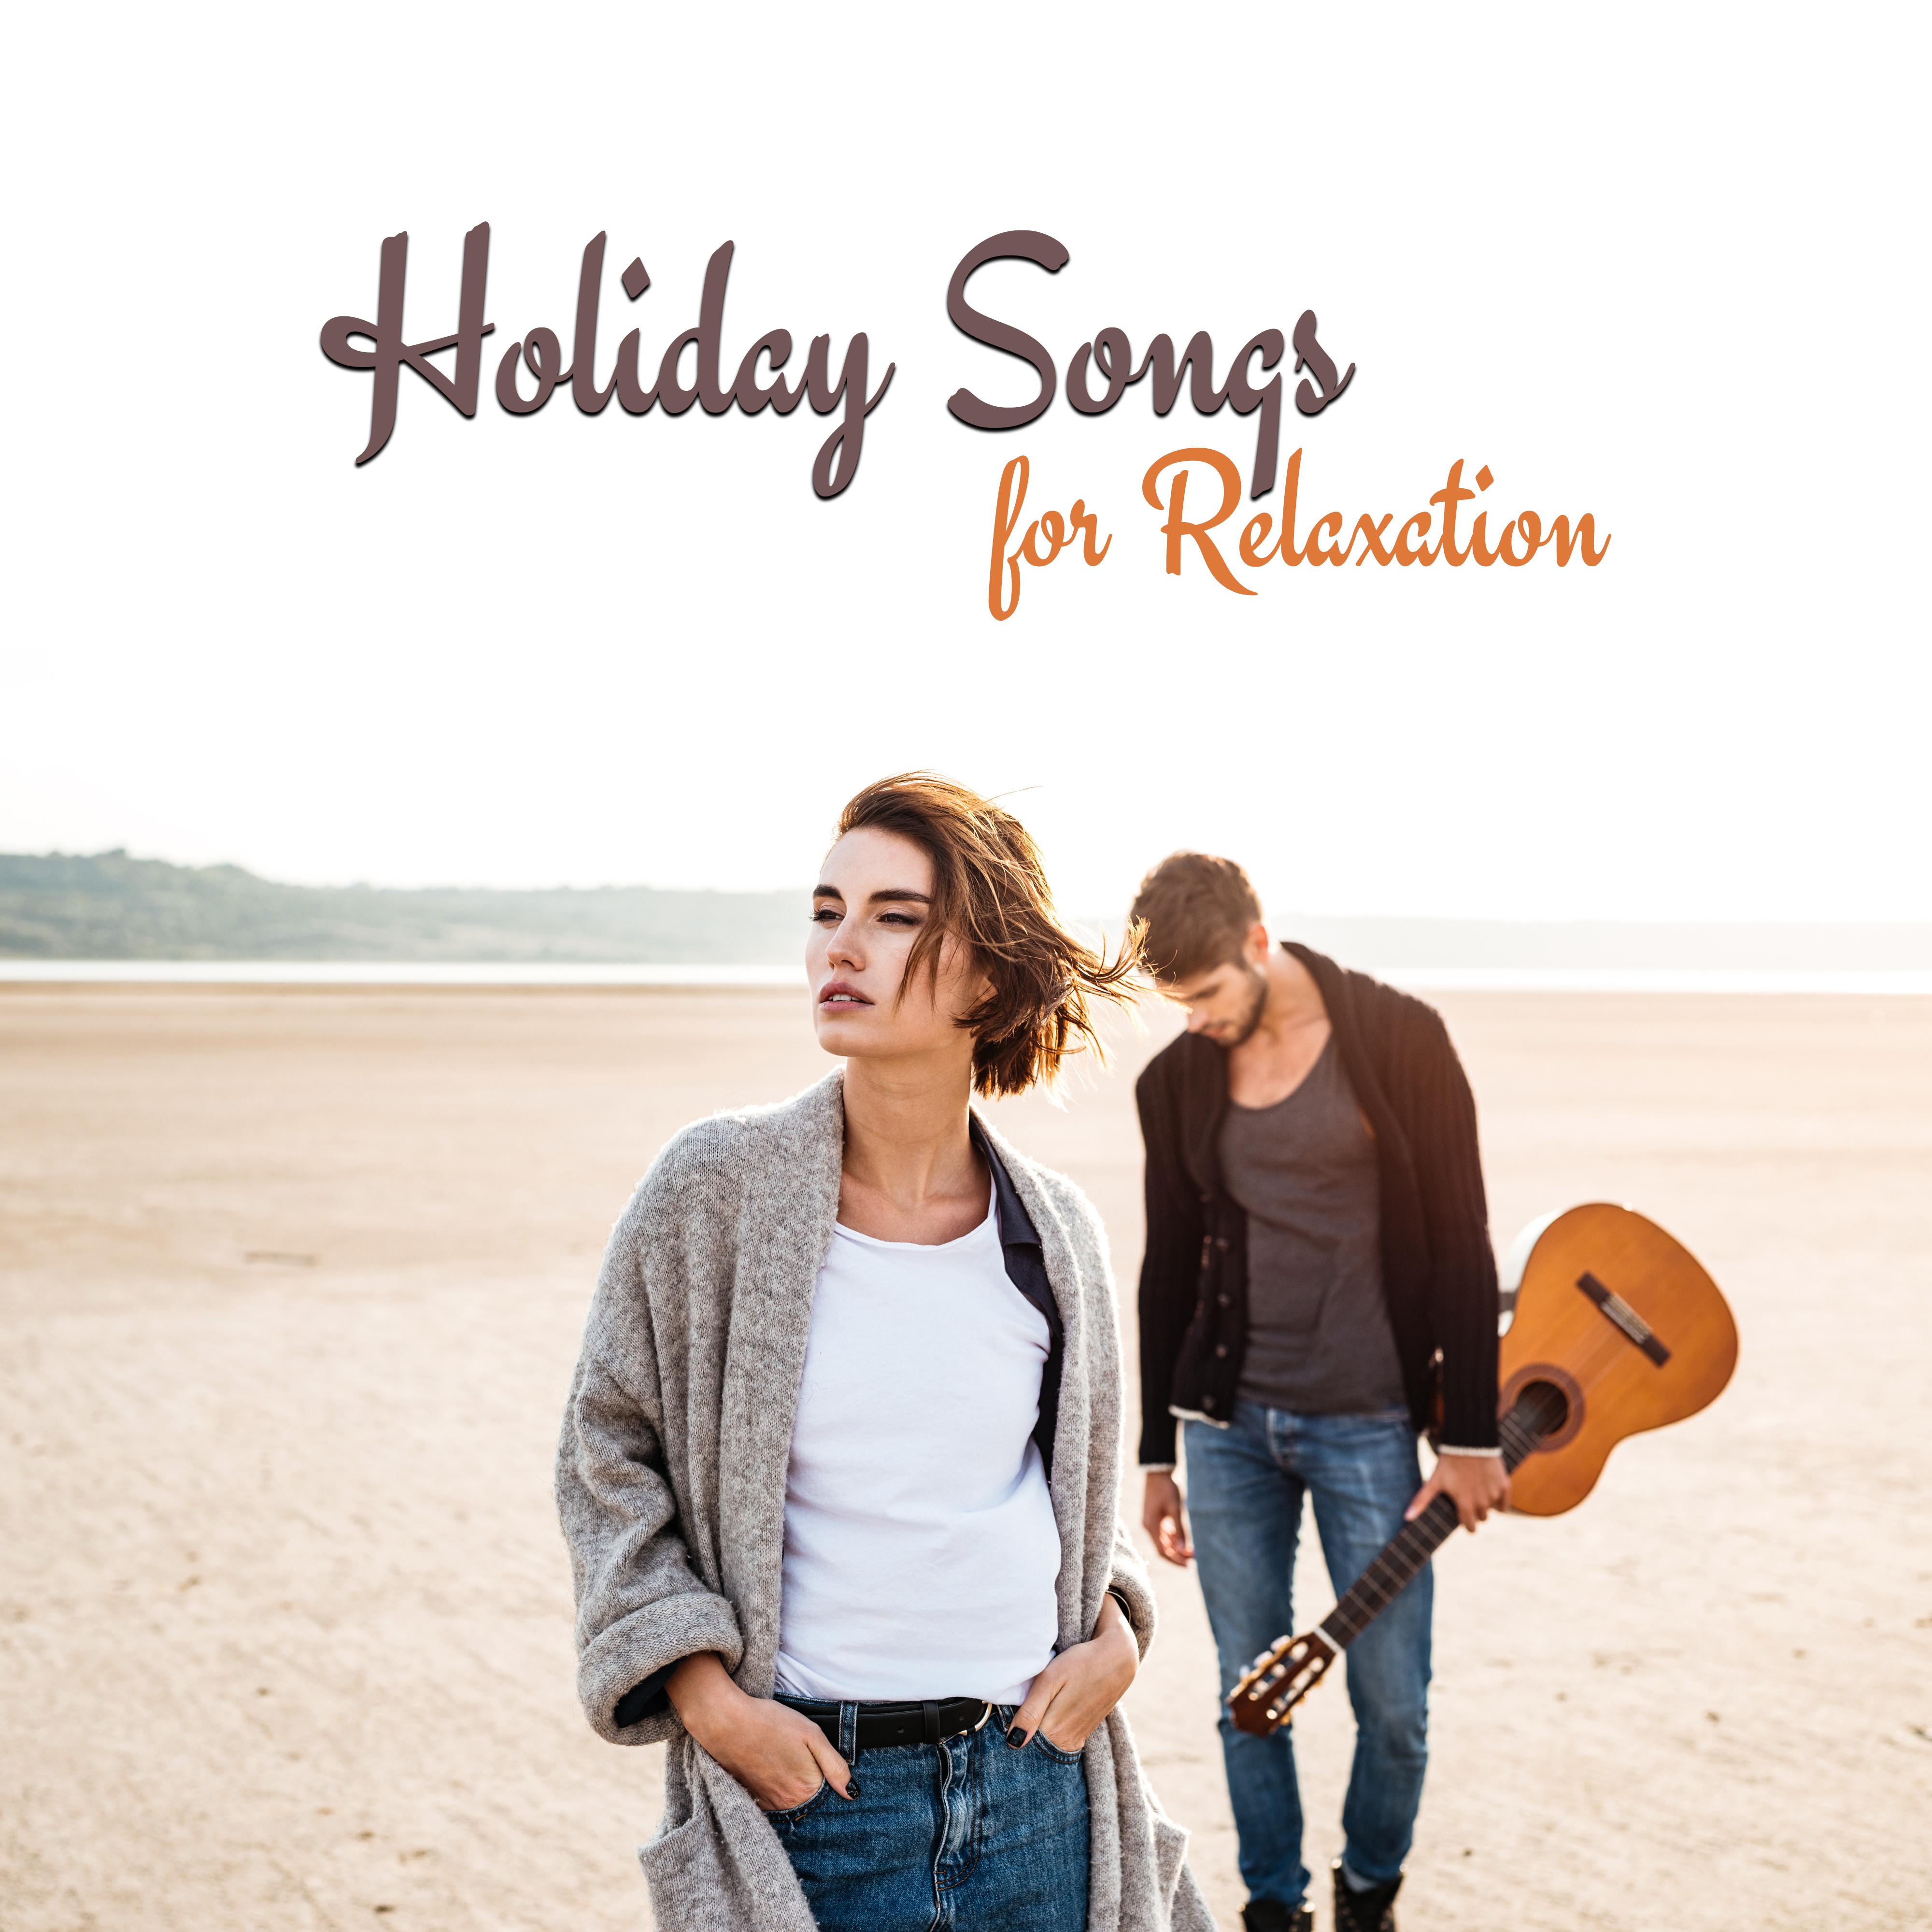 Holiday Songs for Relaxation – Sunny Beach, Chill Paradise, Soft Vibes, Chill House, Ibiza Lounge, Ambient Summer, Rest